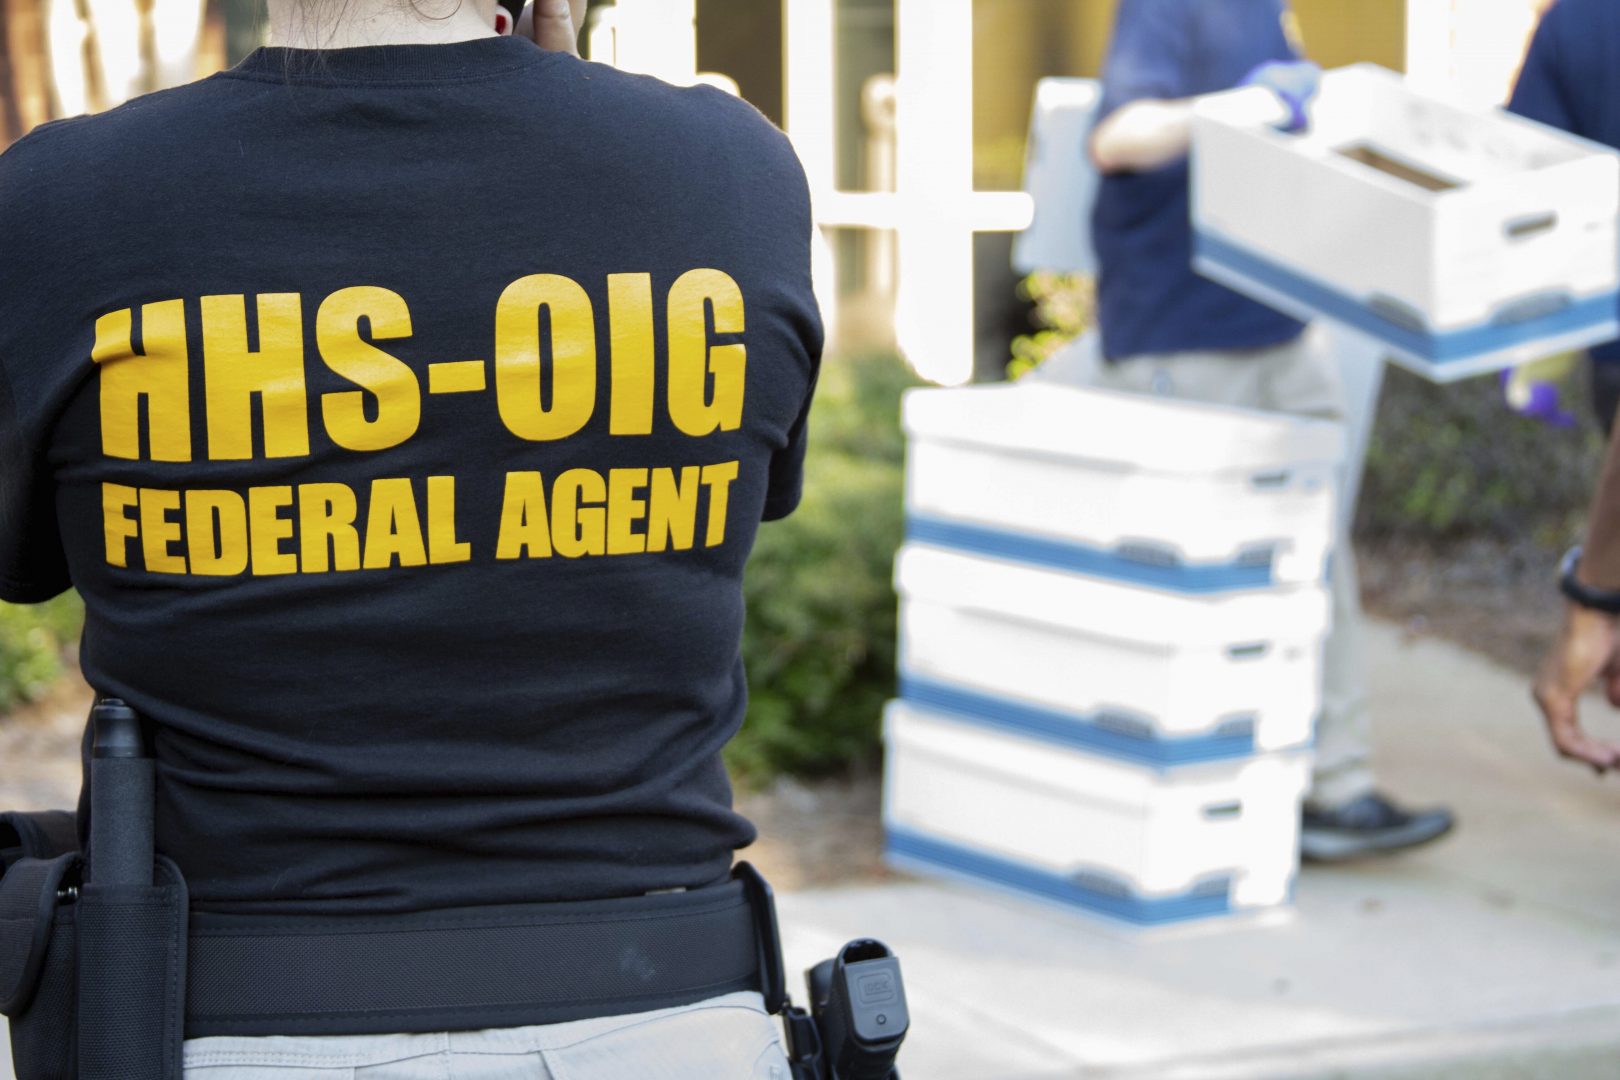 FILE PHOTO: In this photo provided by the Department of Health and Human Services Office of the Inspector General, federal agents from the HHS Office of Inspector General prepare for operations in the Atlanta region Friday, Sept. 27, 2019.